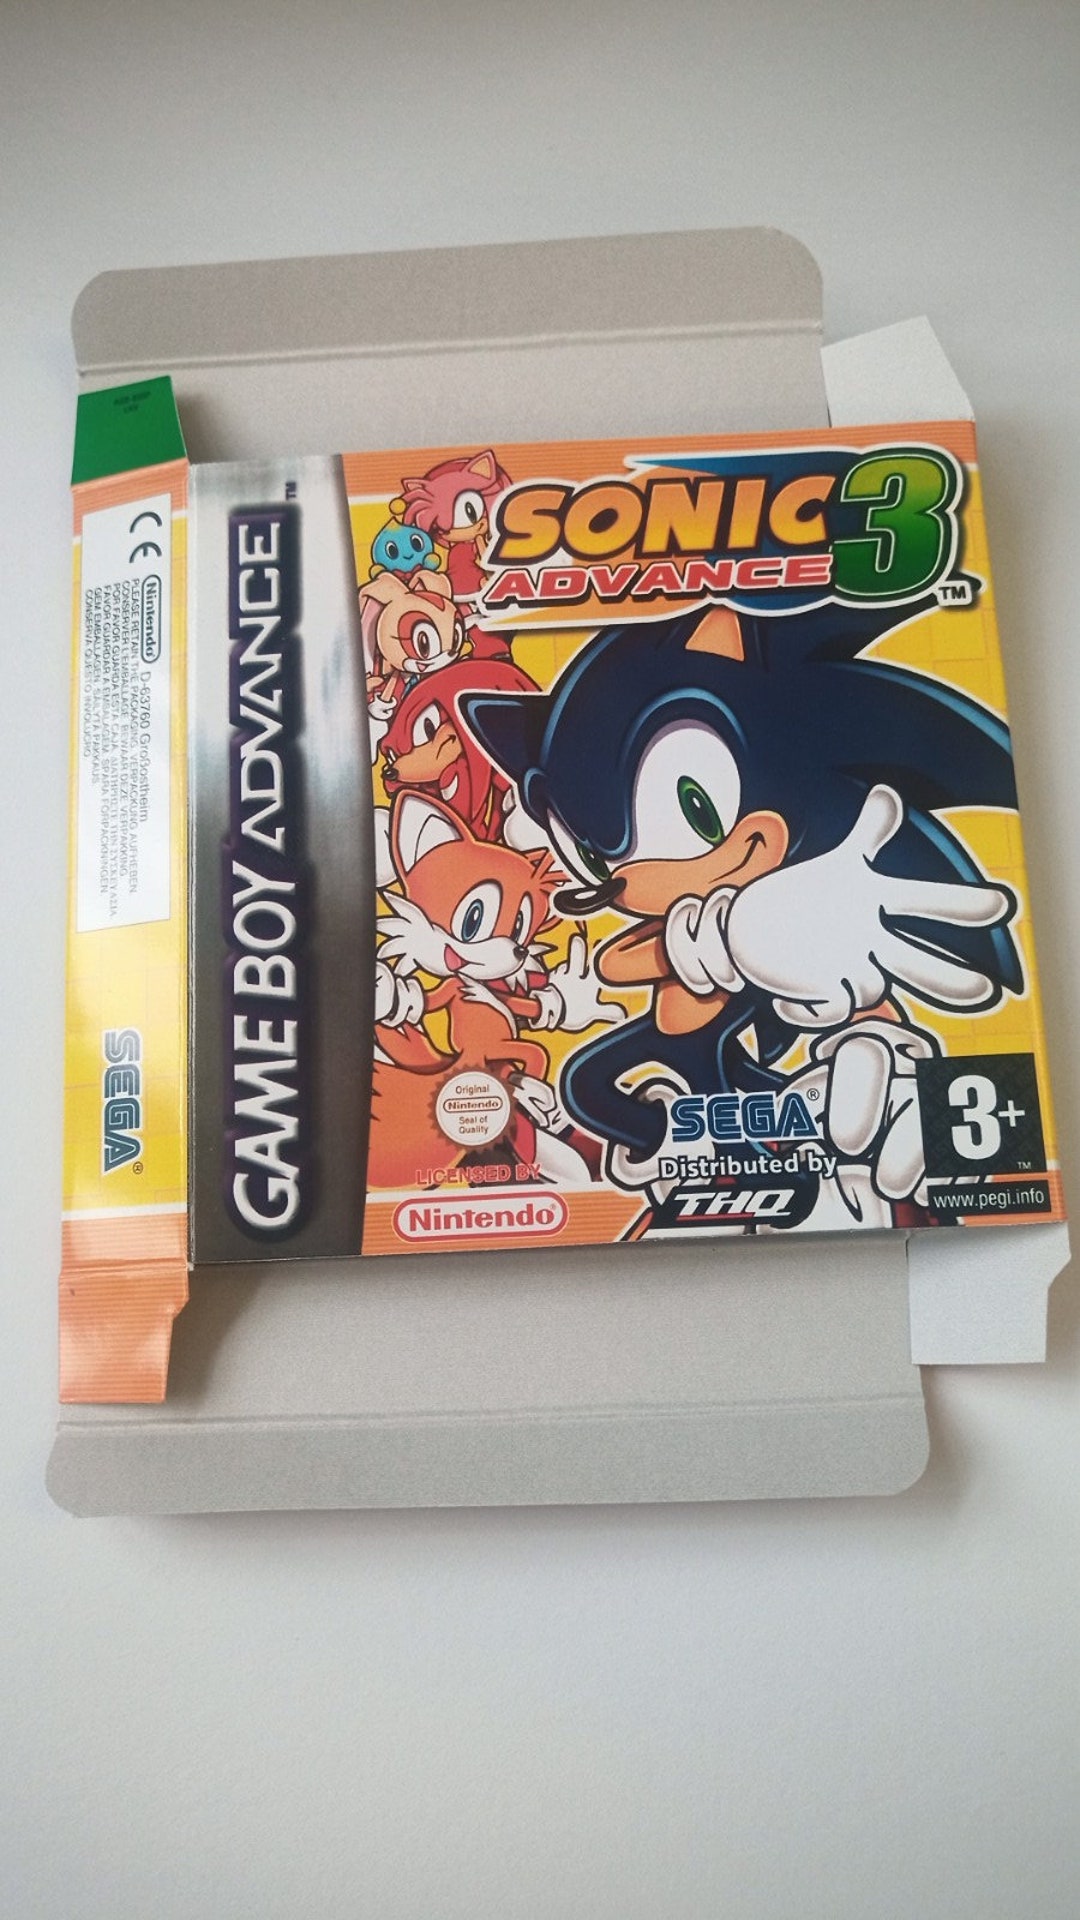 gba SONIC ADVANCE x3 Games 1+2+3 Boxed&Complete Game Boy Advance